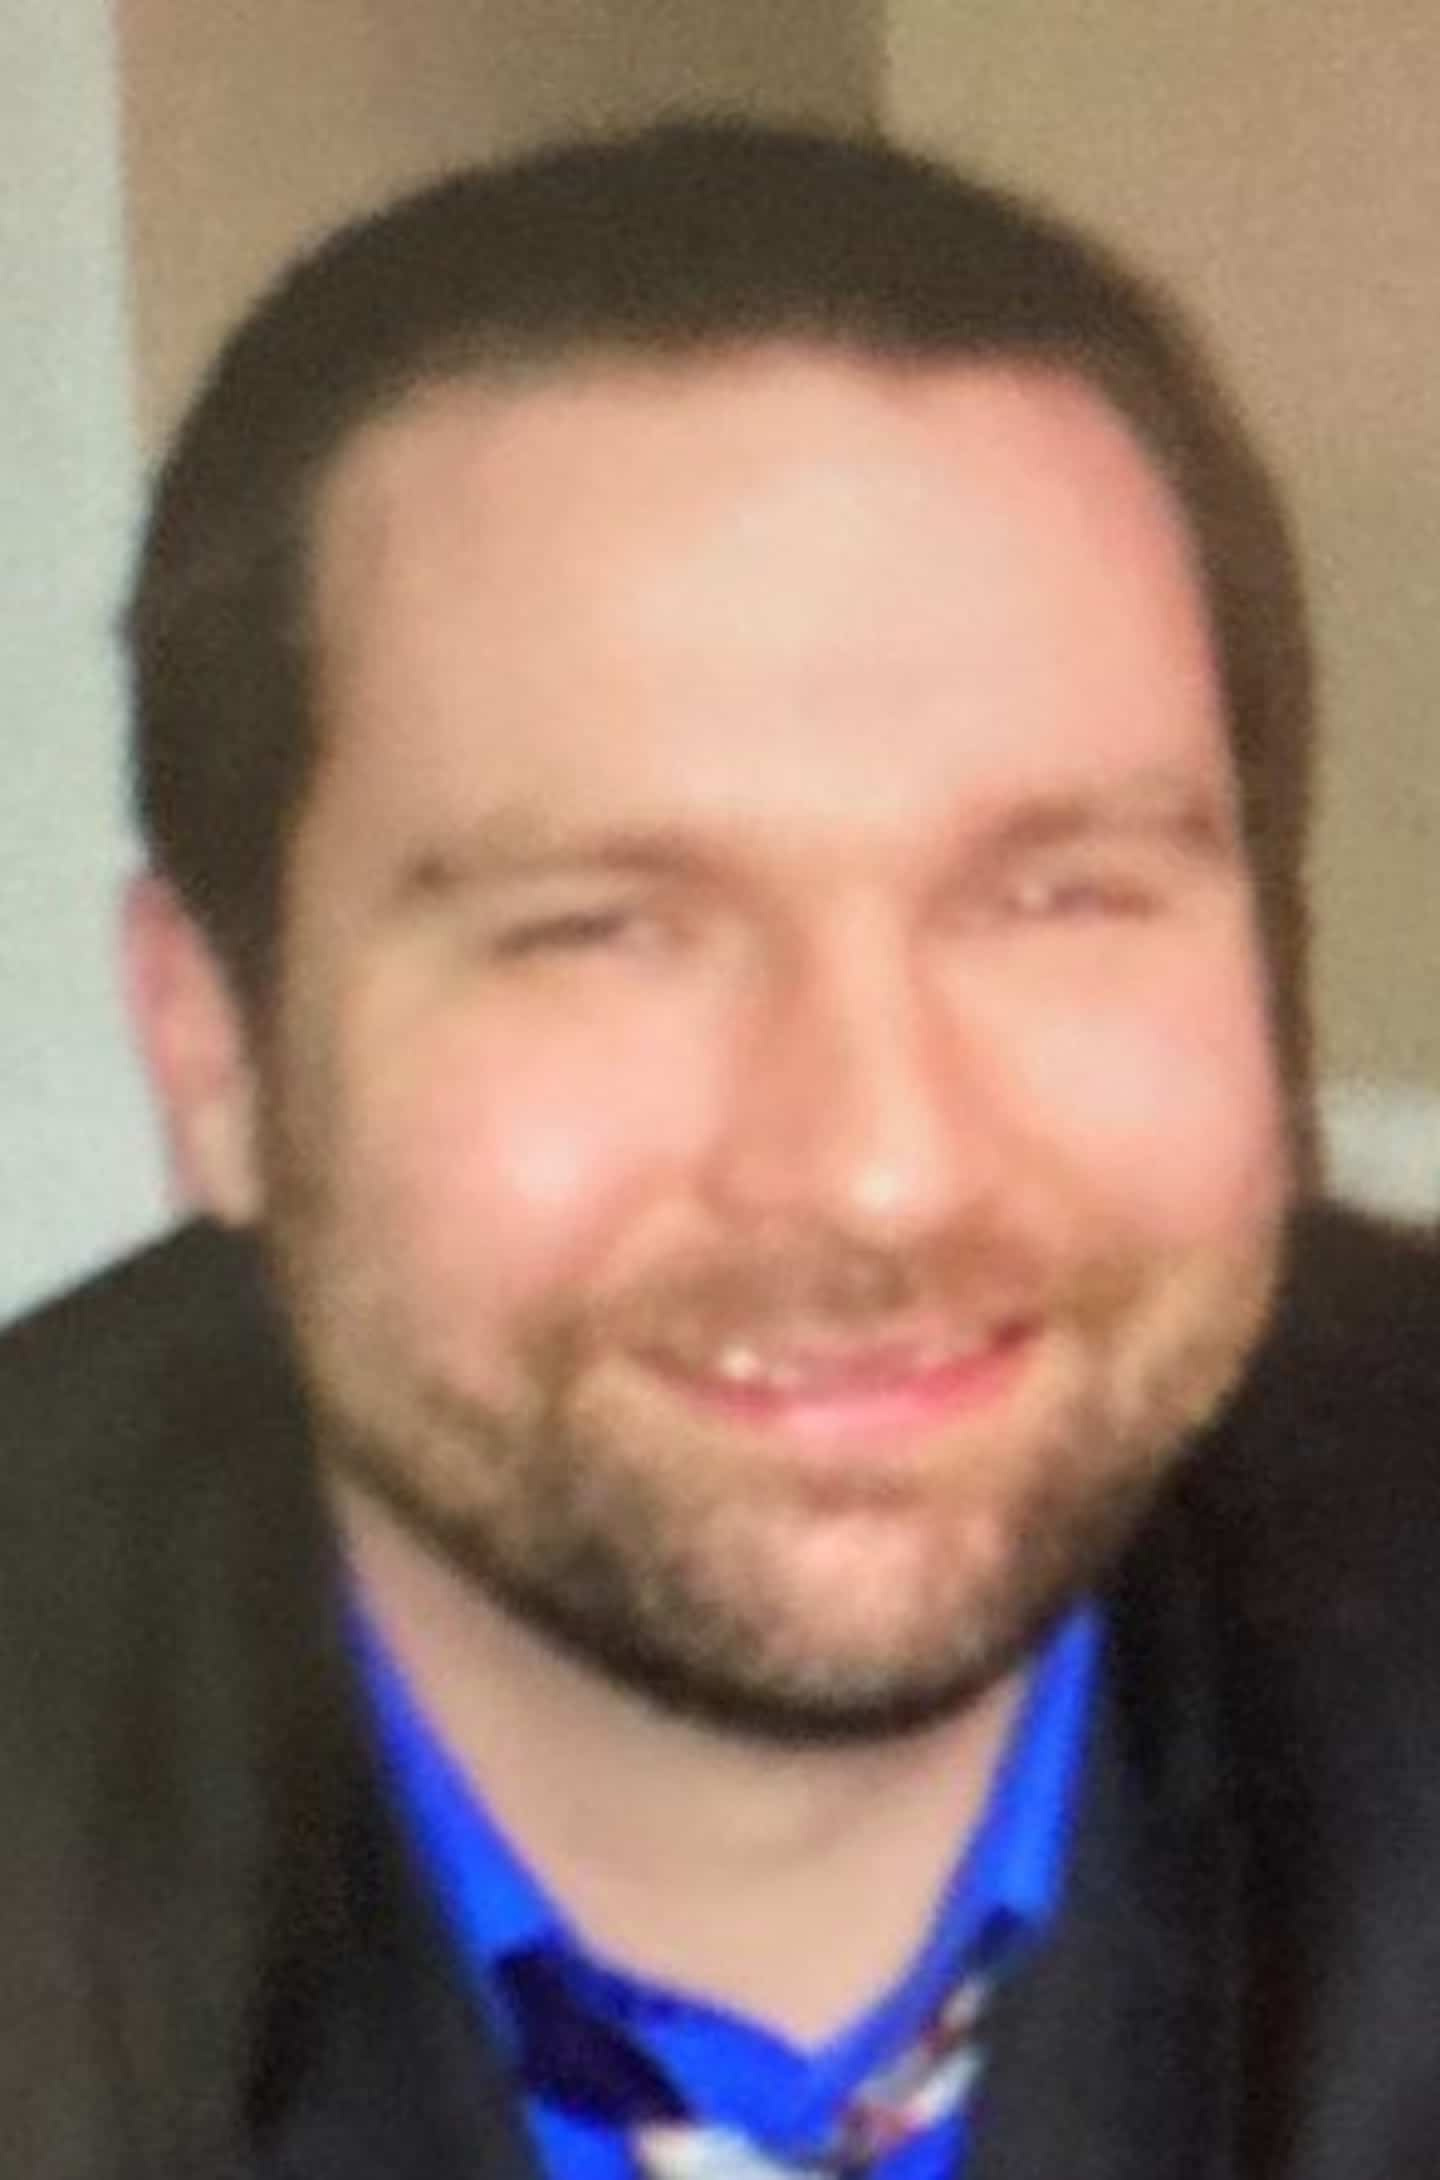 41-year-old man missing in Montreal